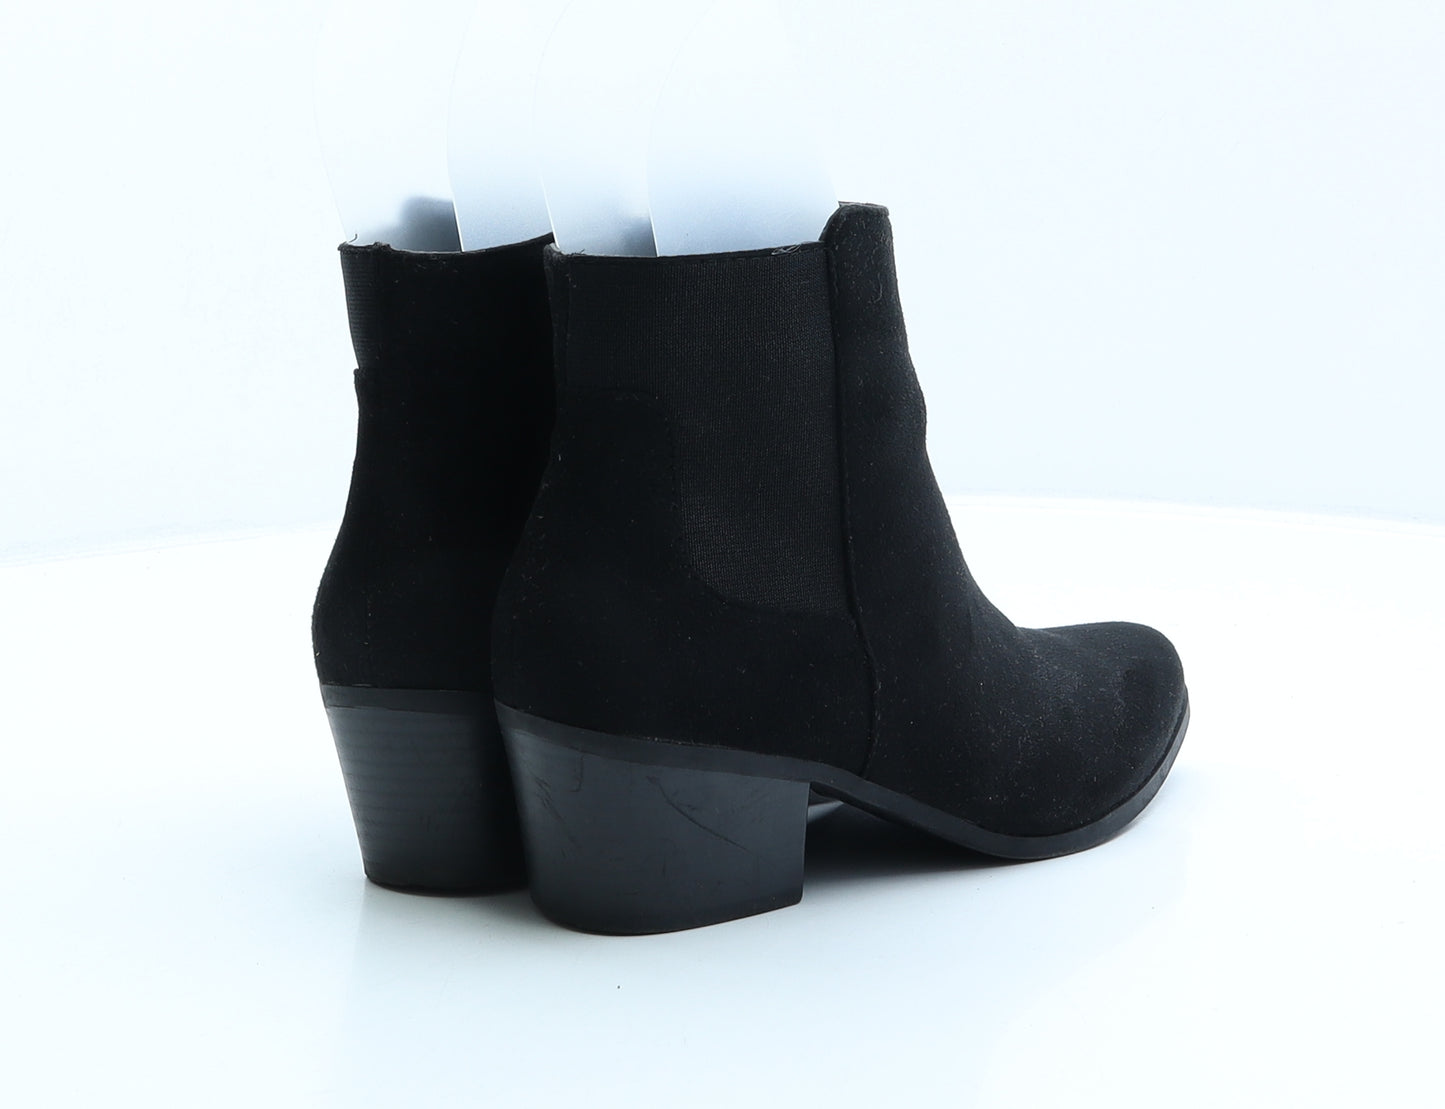 New Look Womens Black Polyester Bootie Boot UK 4 37